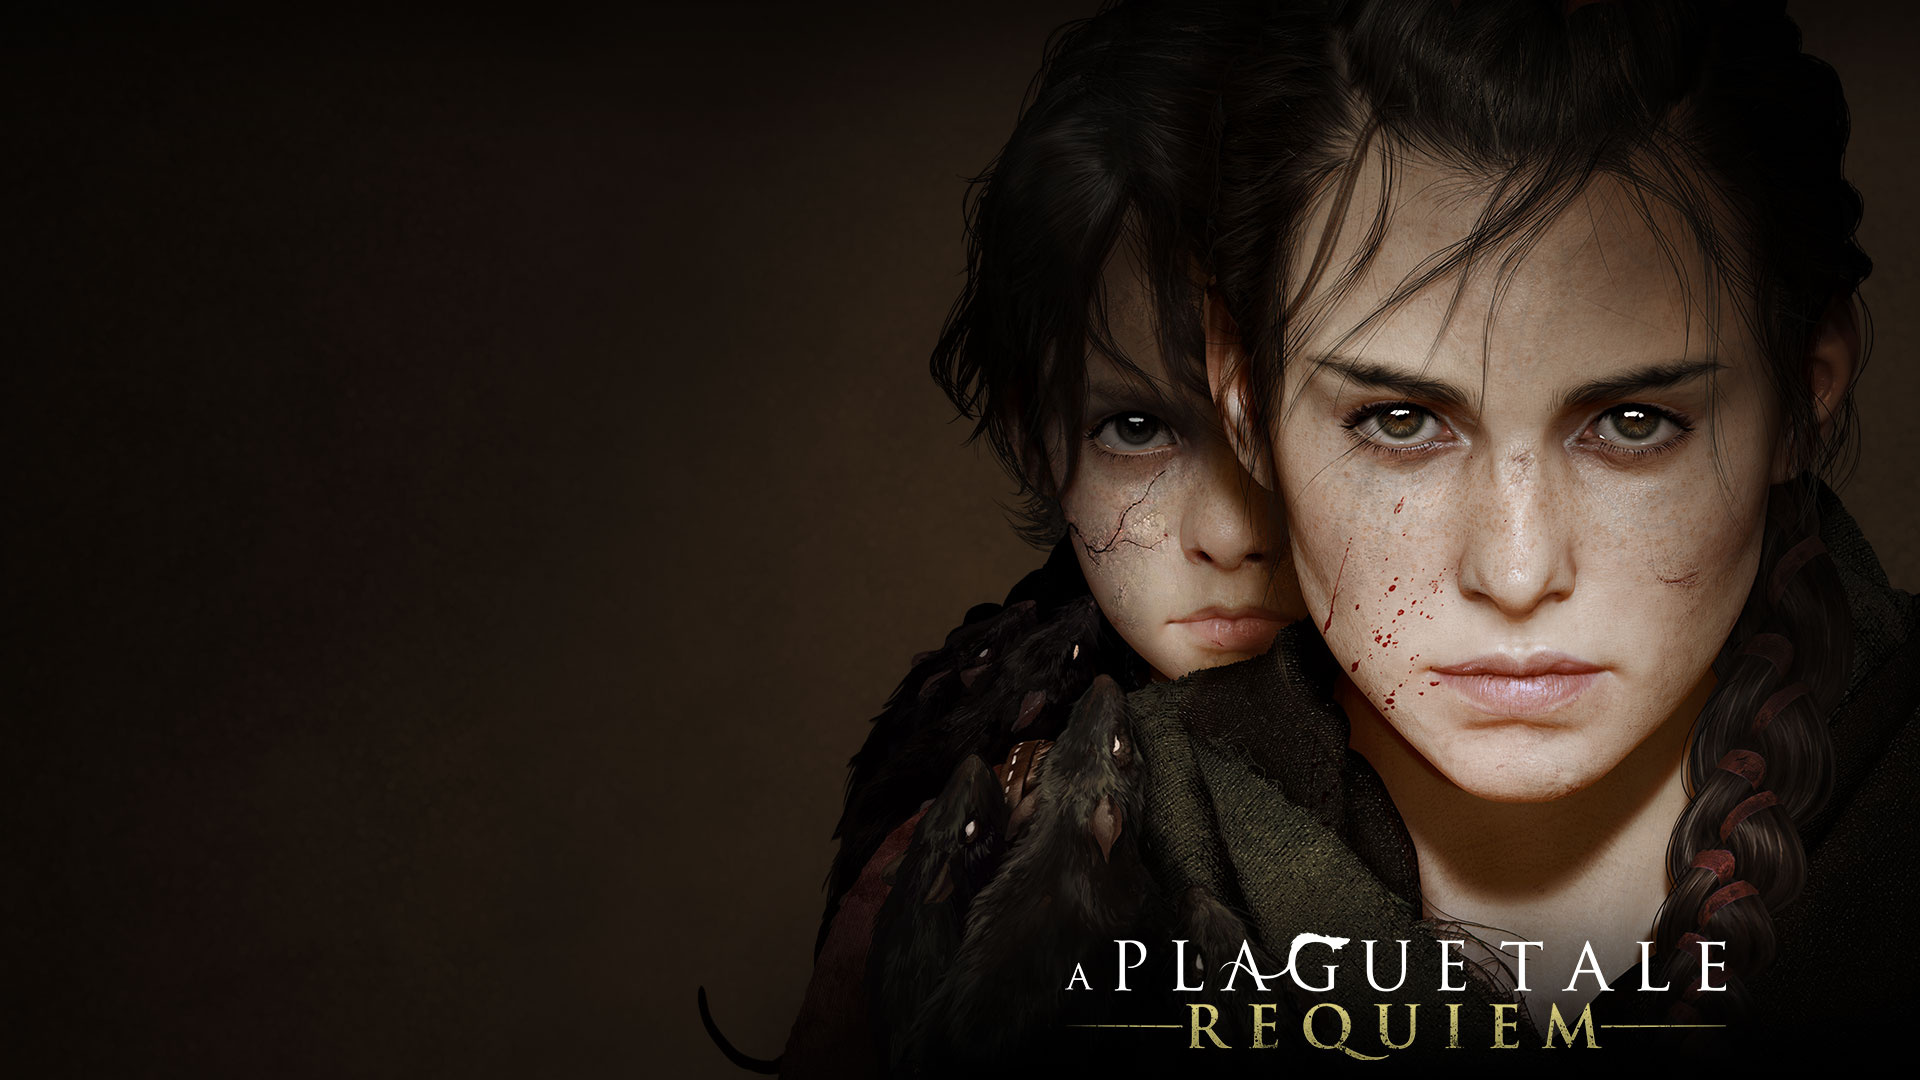 A Plague Tale: Requiem: Béatrice de Rune, Mother of Amicia and Hugo. 1920x1080 Full HD Background.